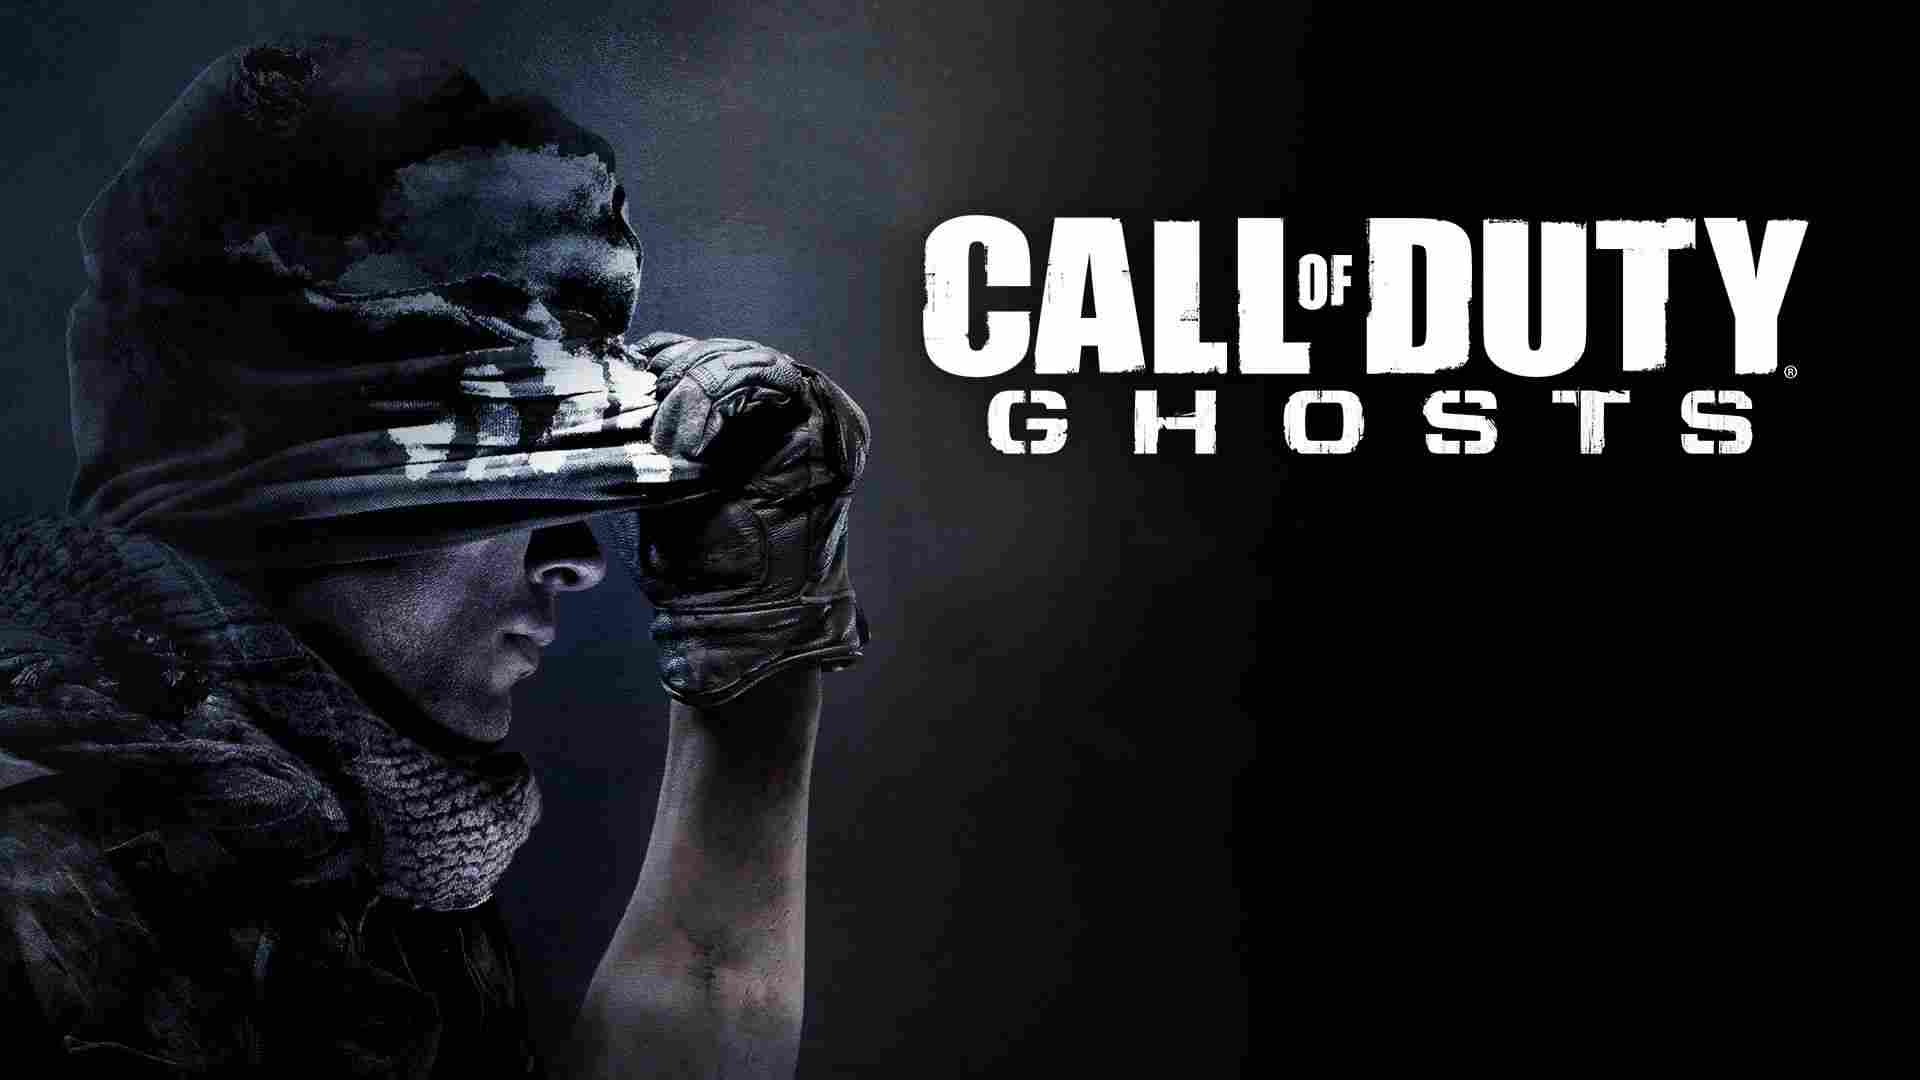 More information about "Call of Duty: Ghosts"